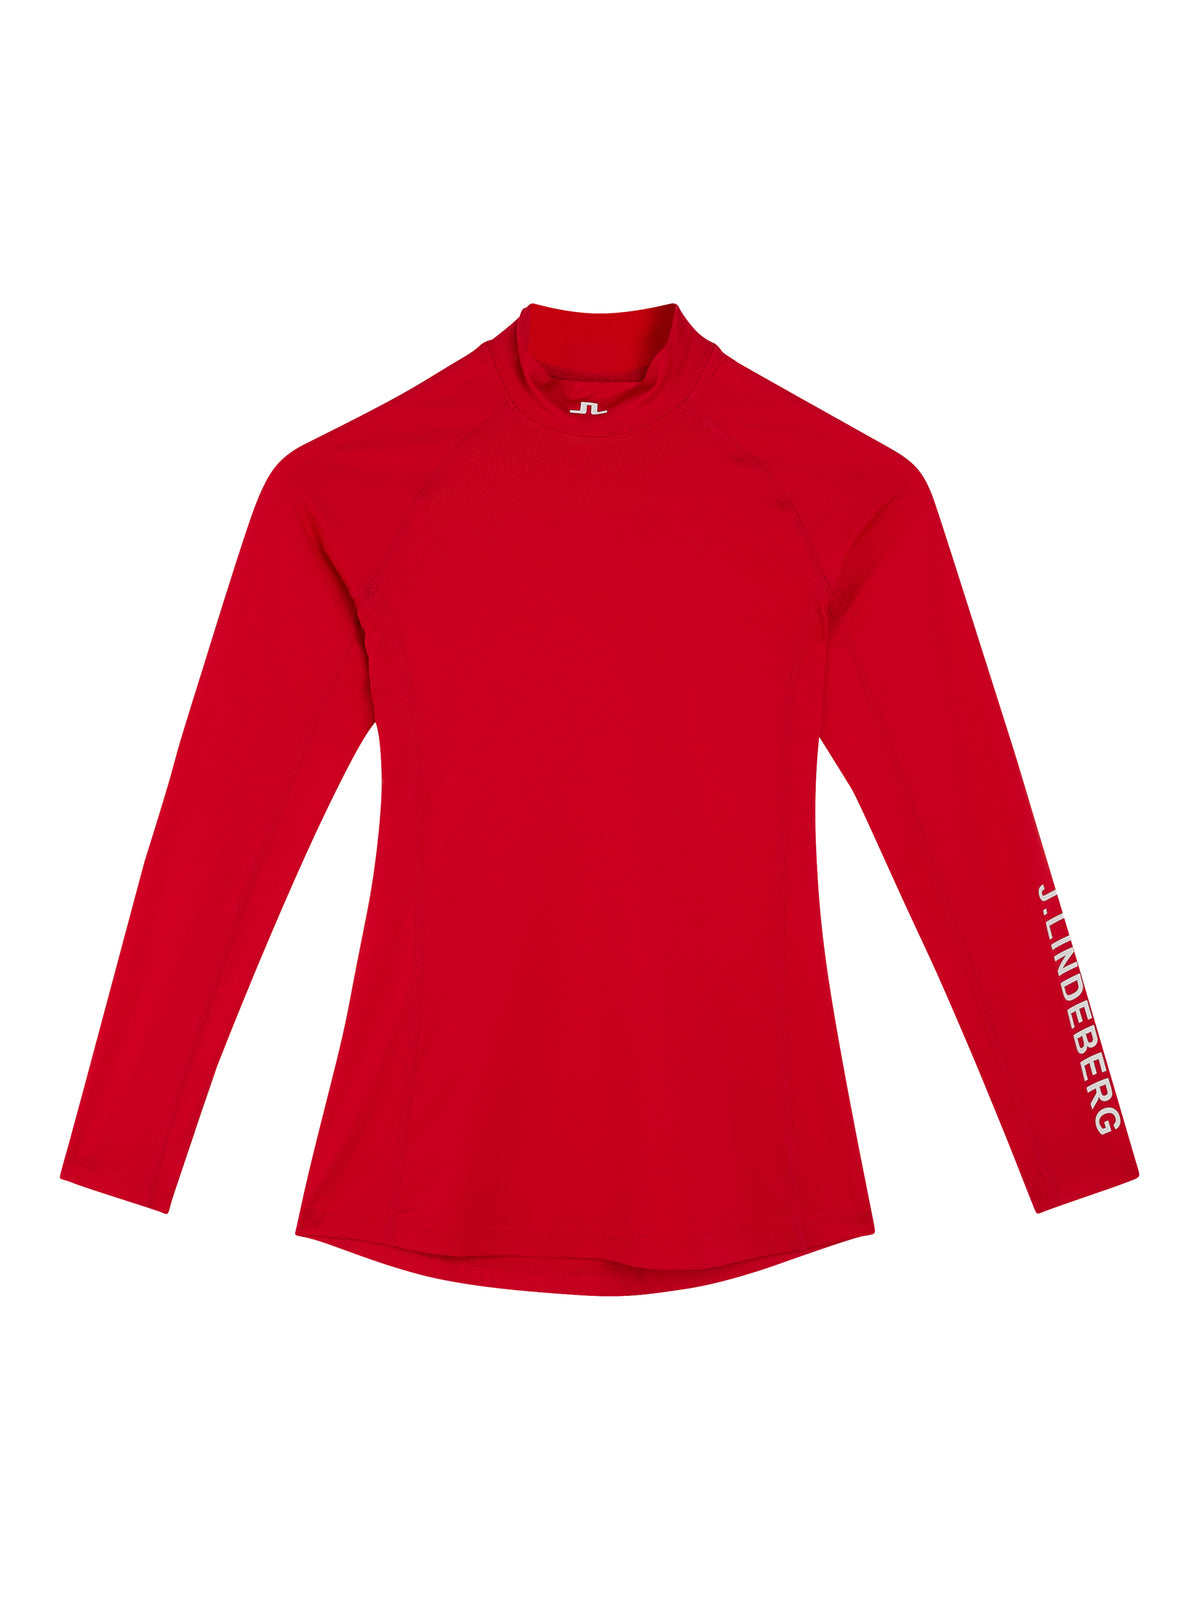 Asa Soft Compression Top / Fiery Red